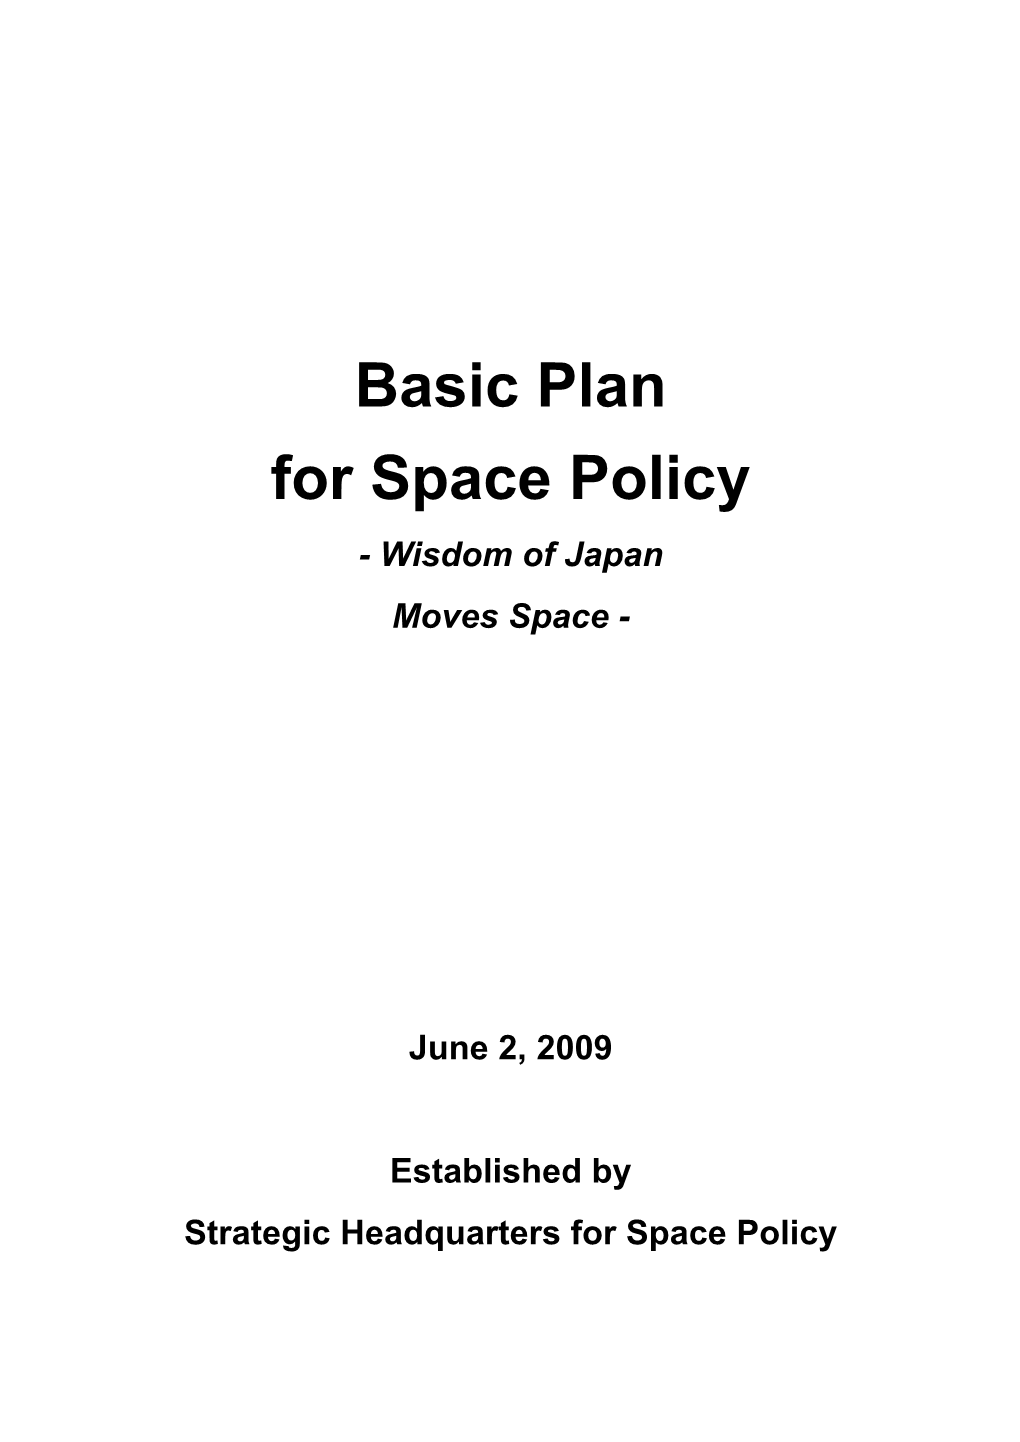 Basic Plan for Space Policy - Wisdom of Japan Moves Space